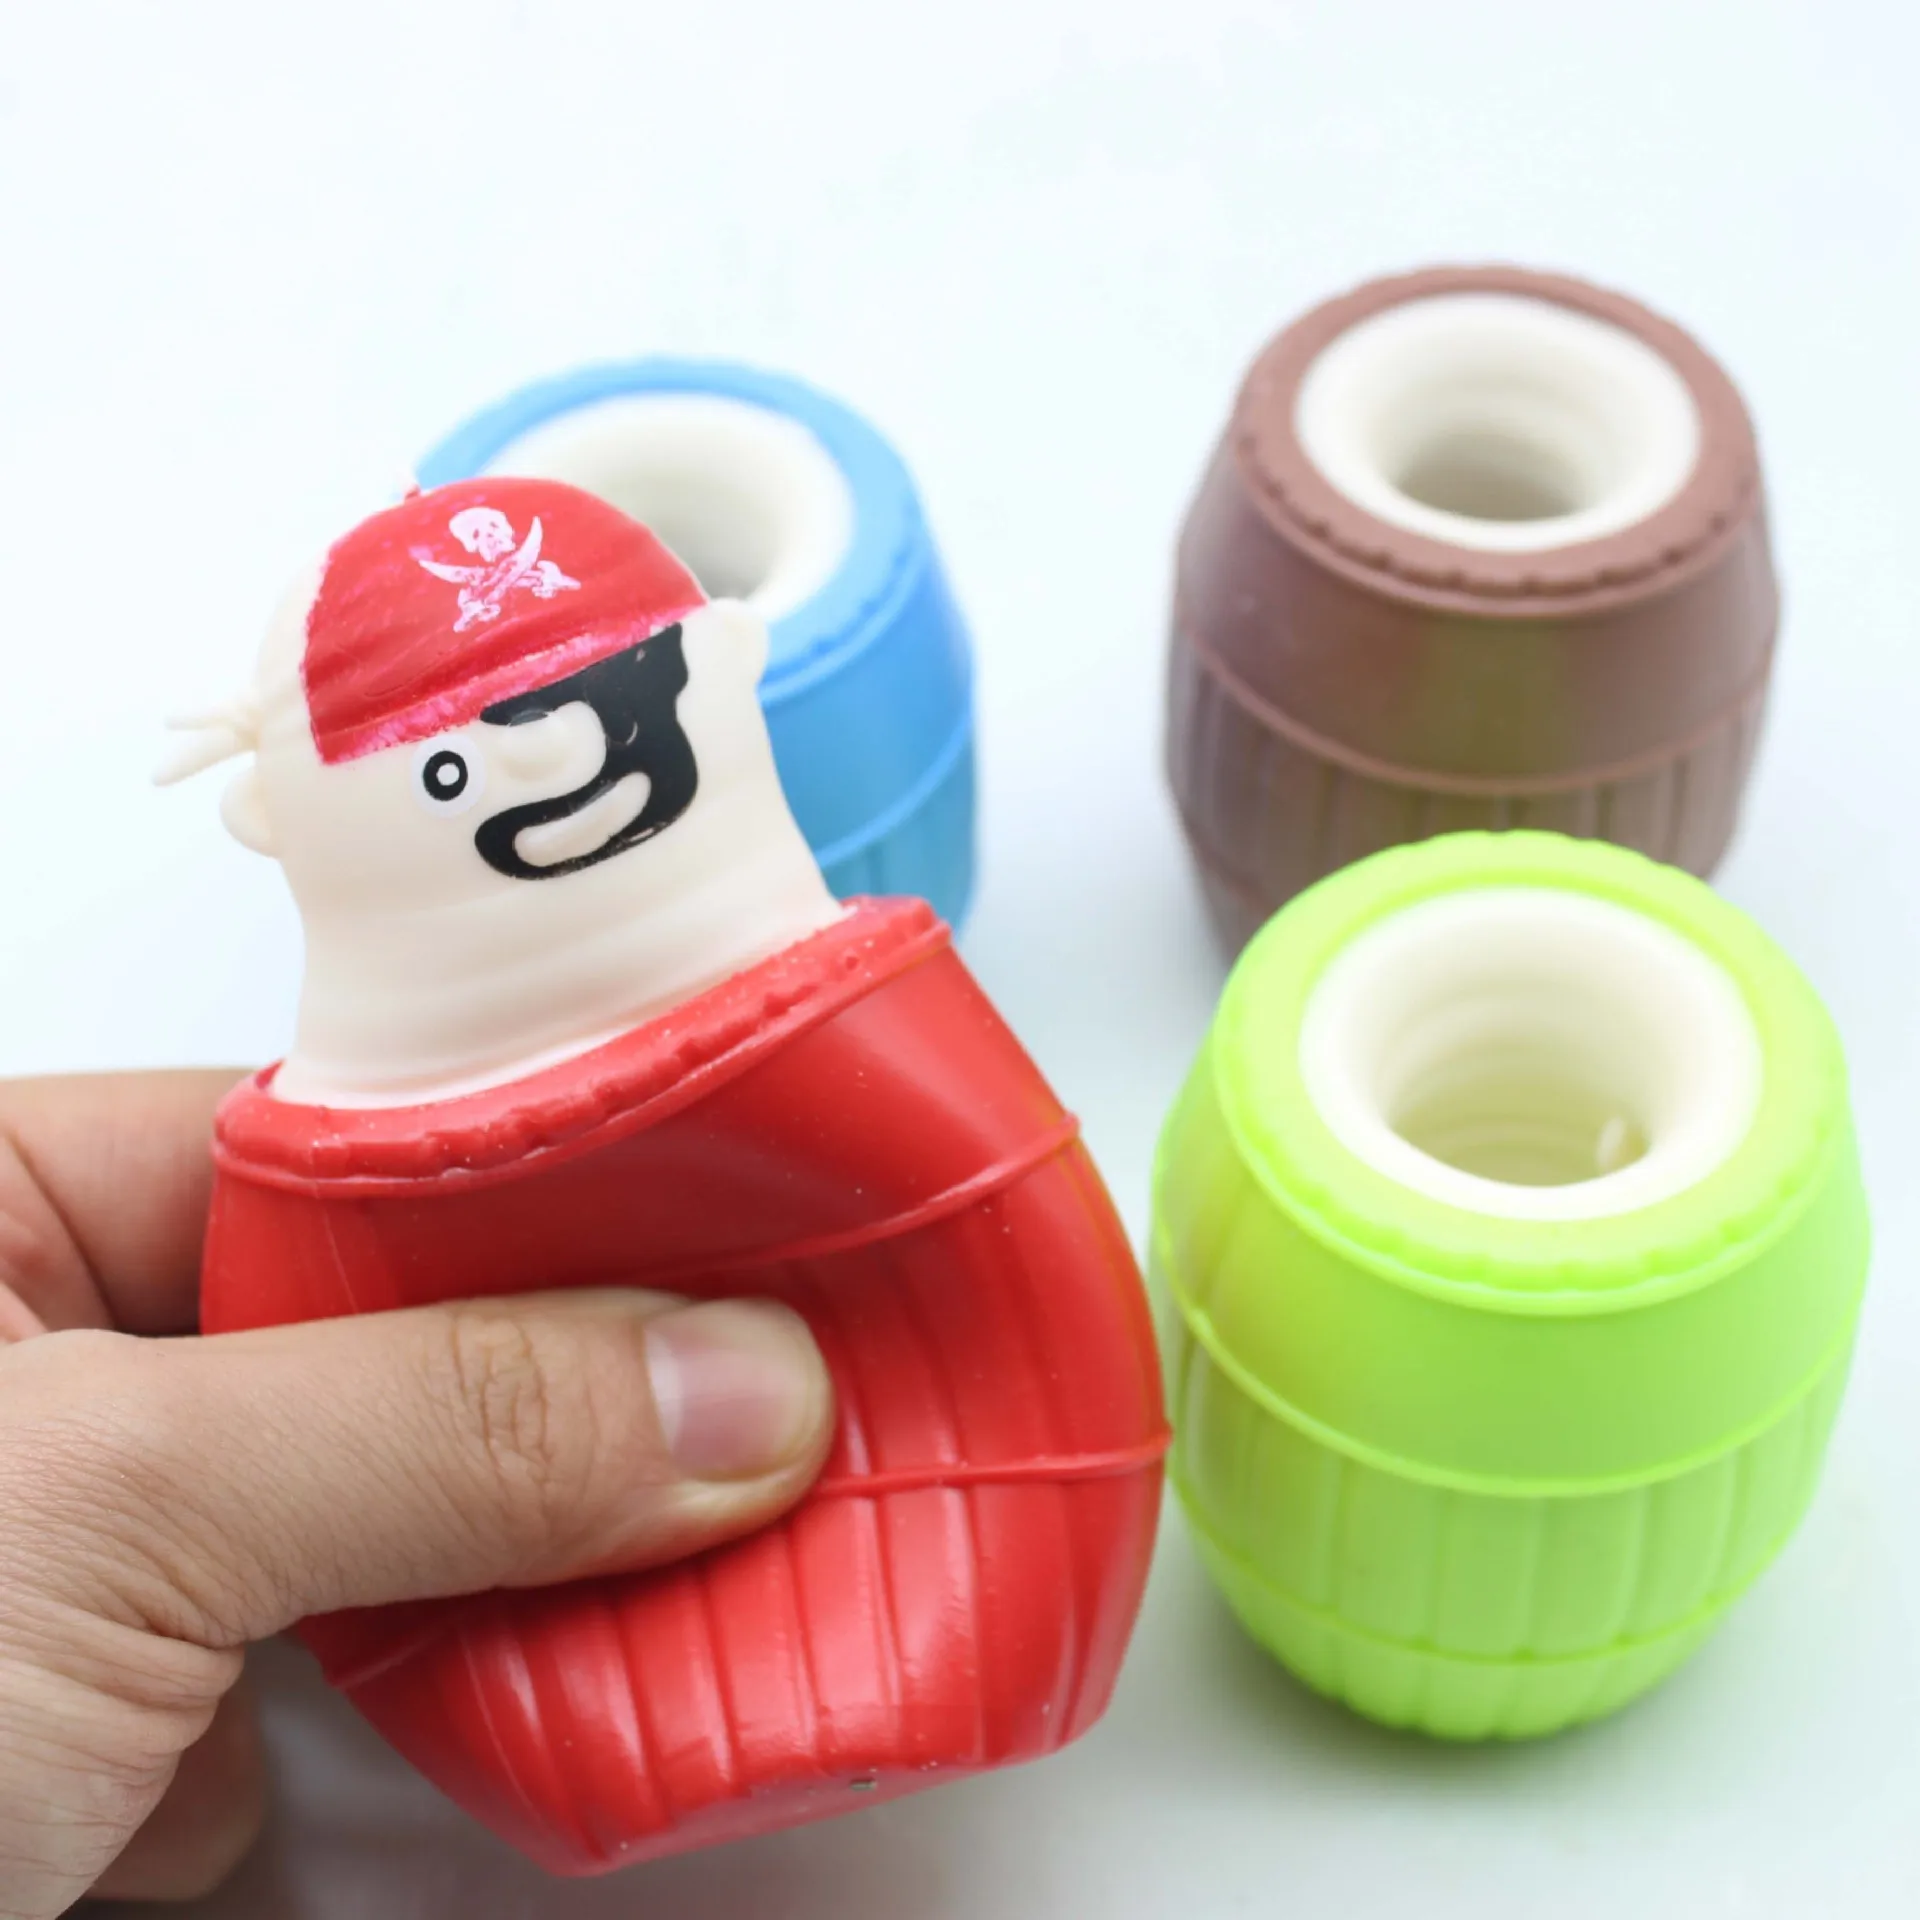 

Anti-Stress Toy Pirate Cup Squeeze Fidget Toys Tpr Squishy Anti Stress Funny Stress Relief For Kids Adults Gift Prop J164